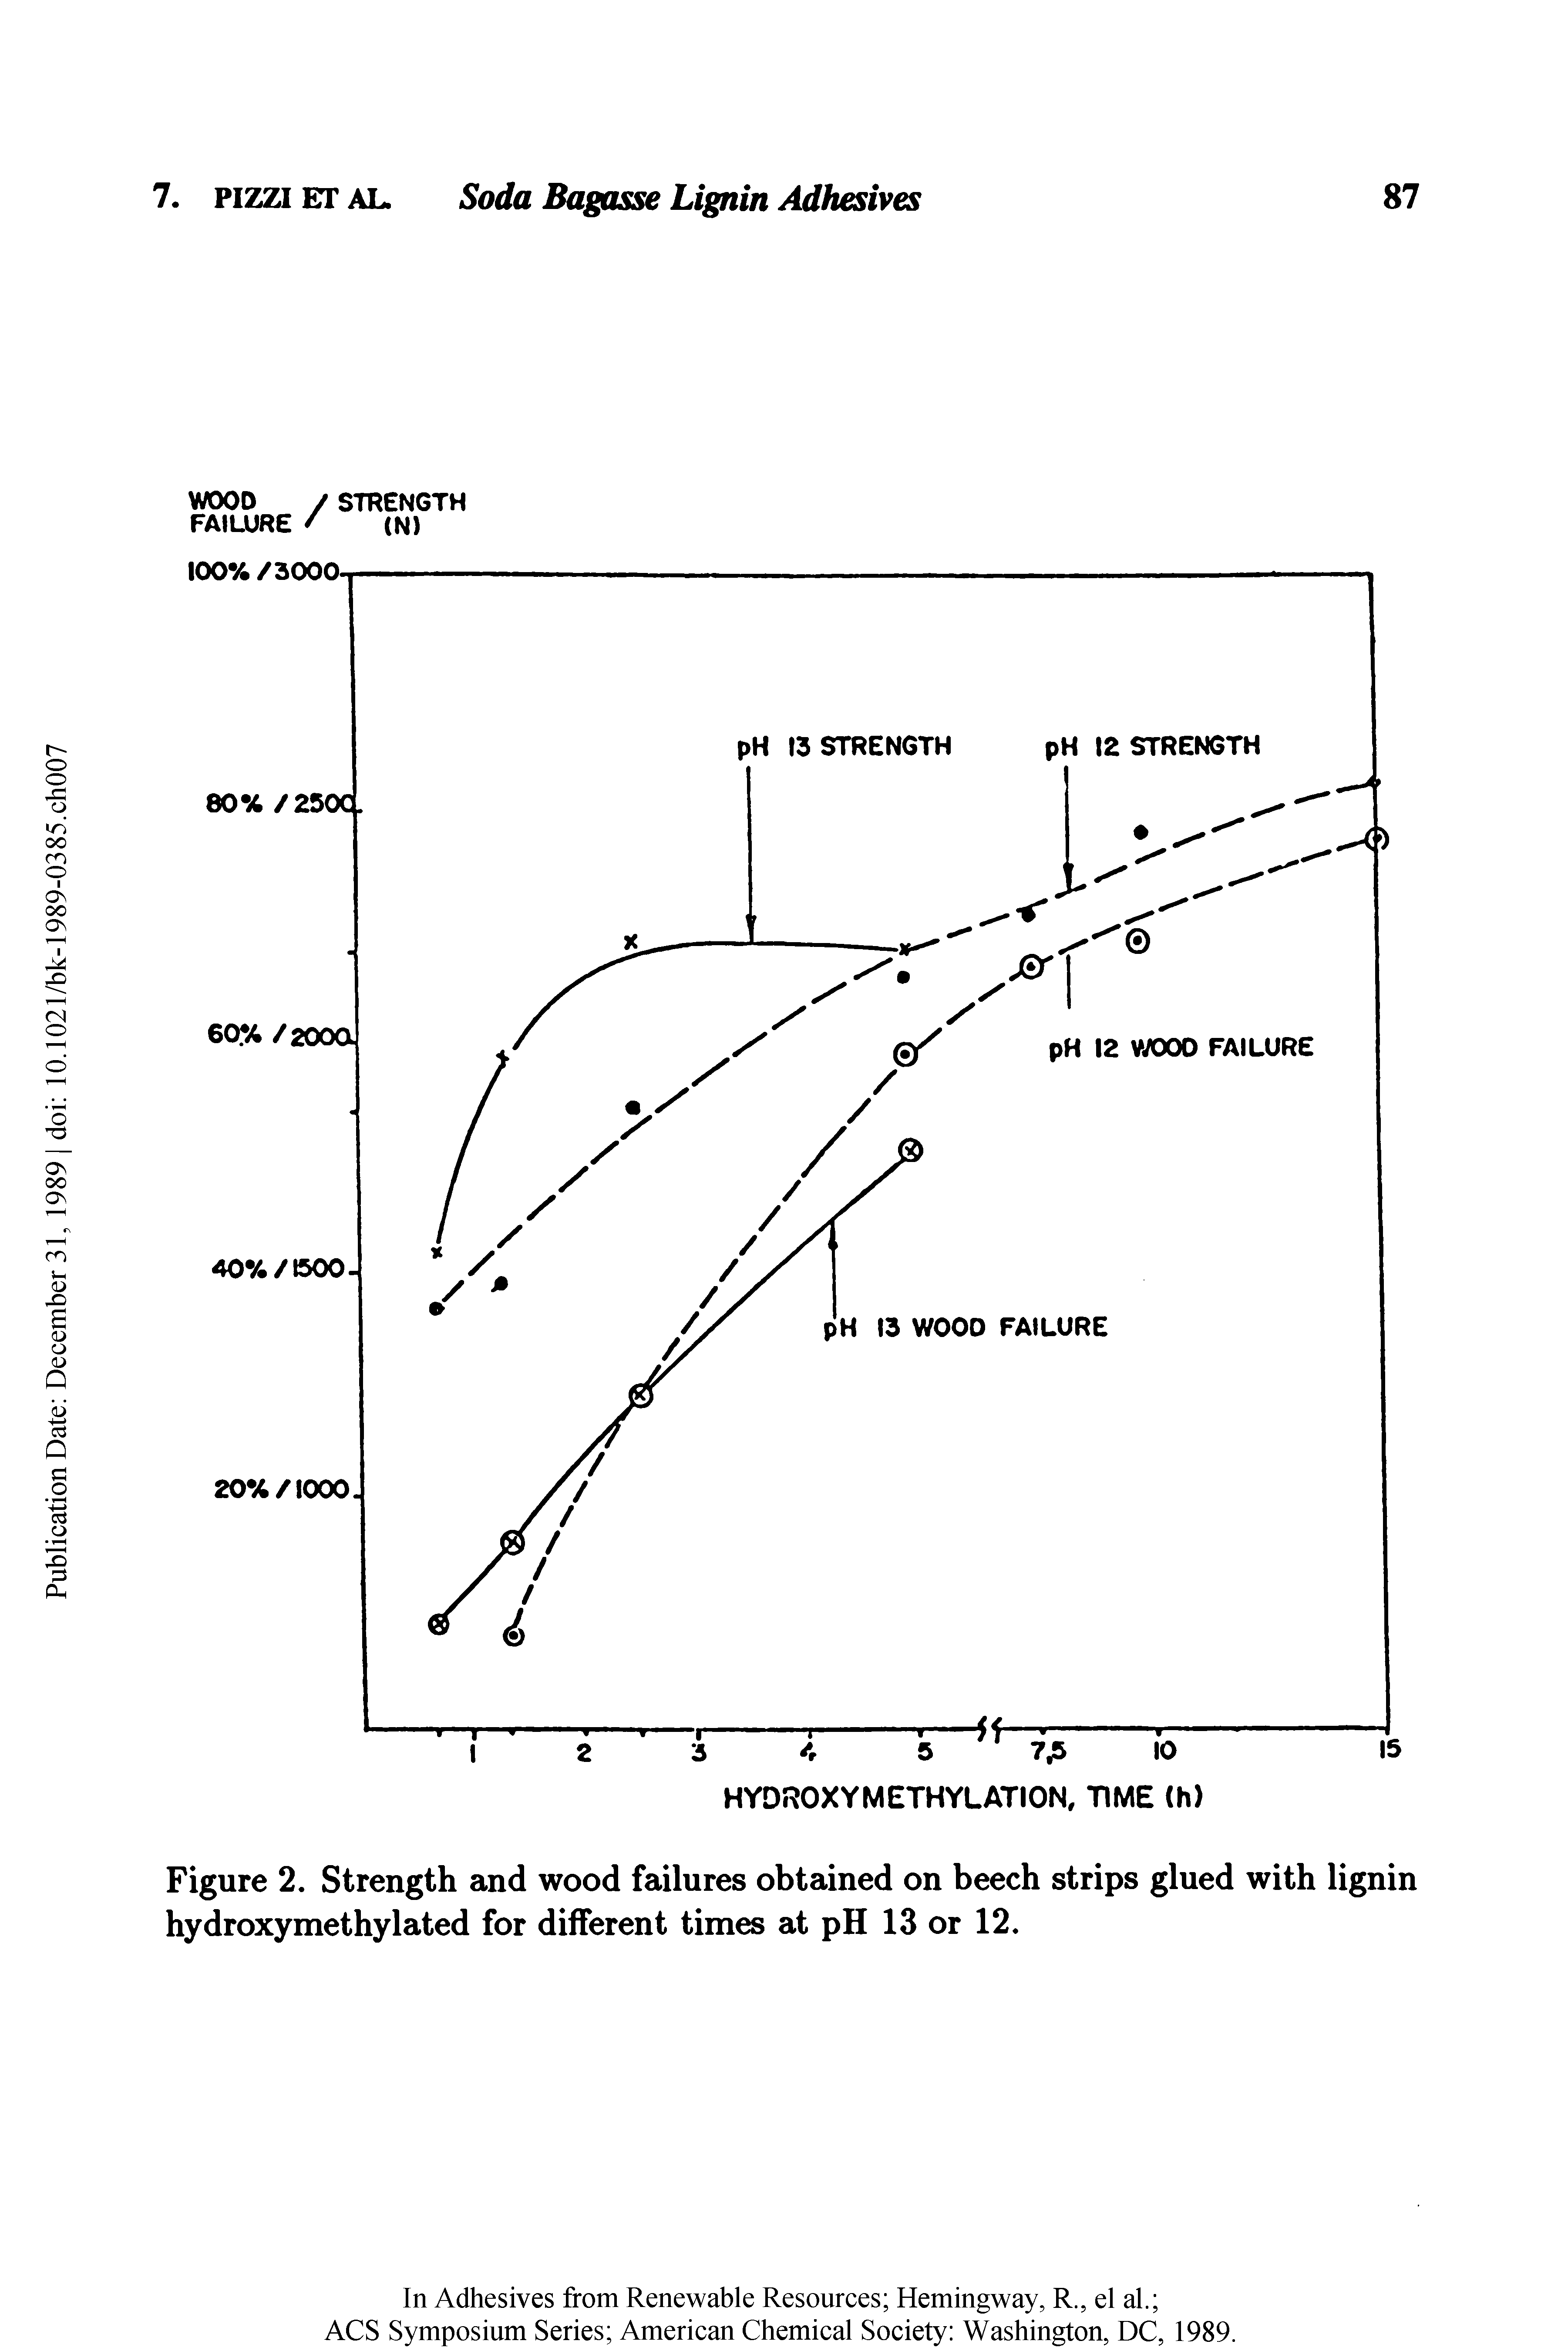 Figure 2. Strength and wood failures obtained on beech strips glued with lignin hydroxymethylated for different times at pH 13 or 12.